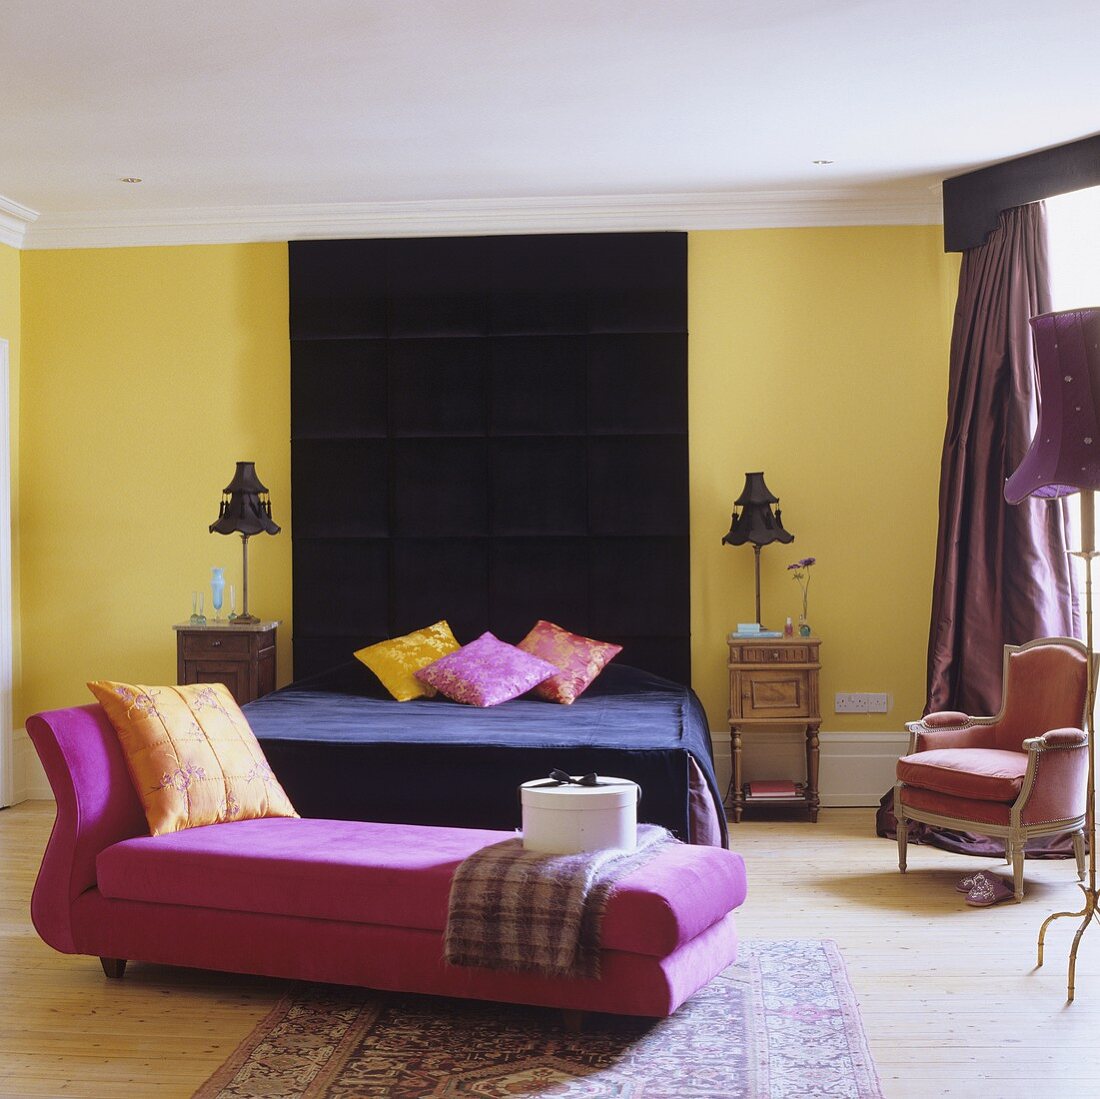 A colourful bedroom - a pink chaise longue with a black bed in the background with a ceiling-high headboard on the yellow wall